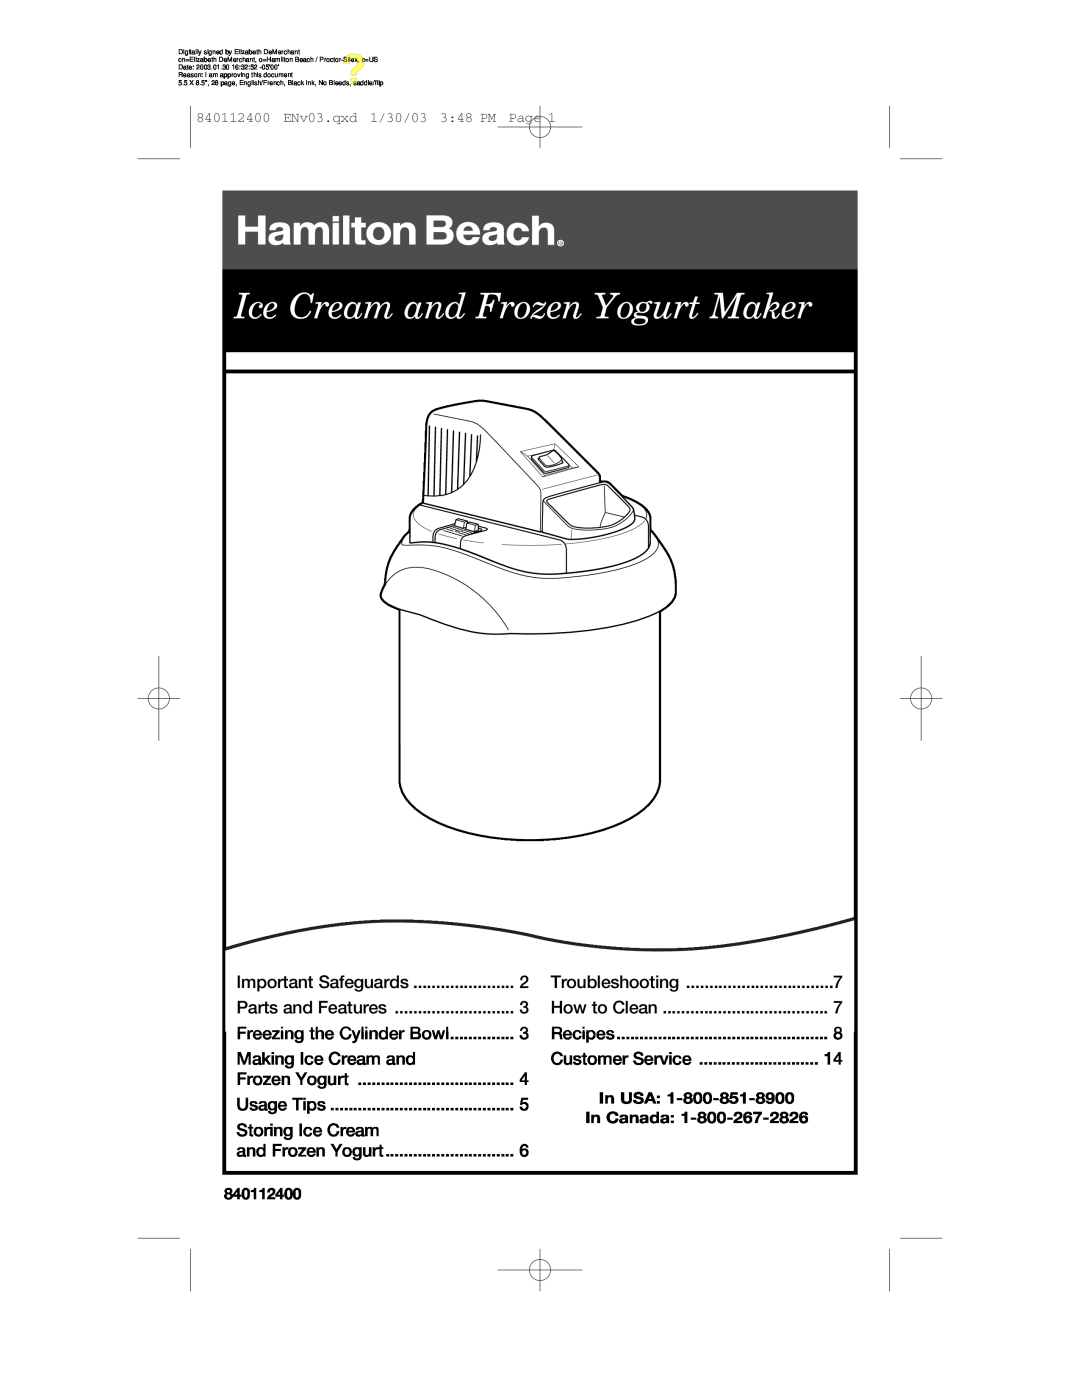 Hamilton Beach 68120 manual Ice Cream and Frozen Yogurt Maker, Important Safeguards, Troubleshooting, Parts and Features 